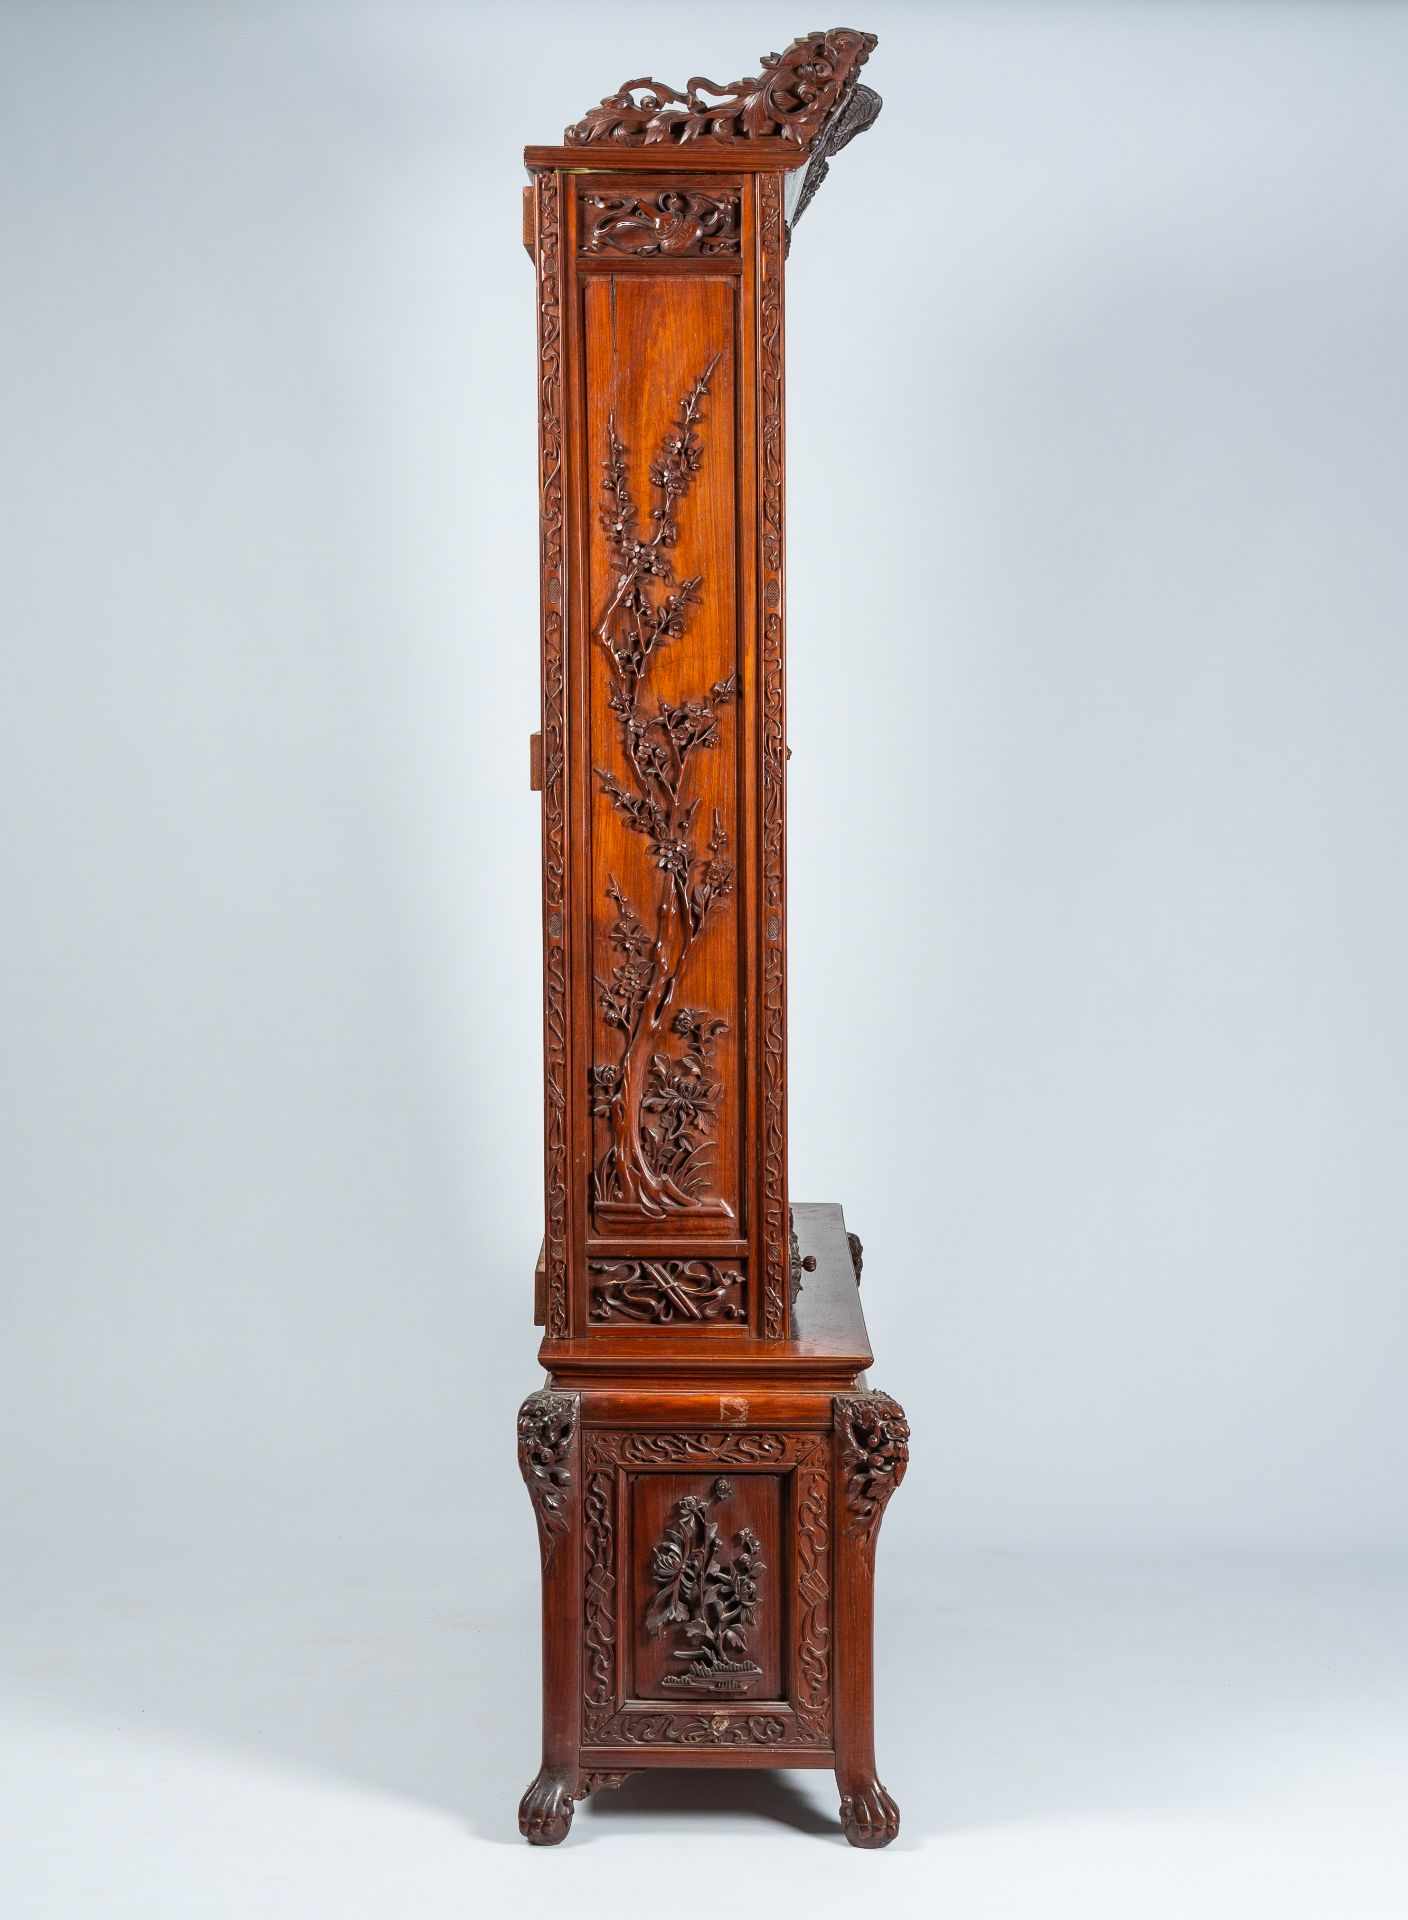 A Chinese or Vietnamese wooden four-door display cabinet with mother-of-pearl inlay, ca. 1900 - Image 15 of 15